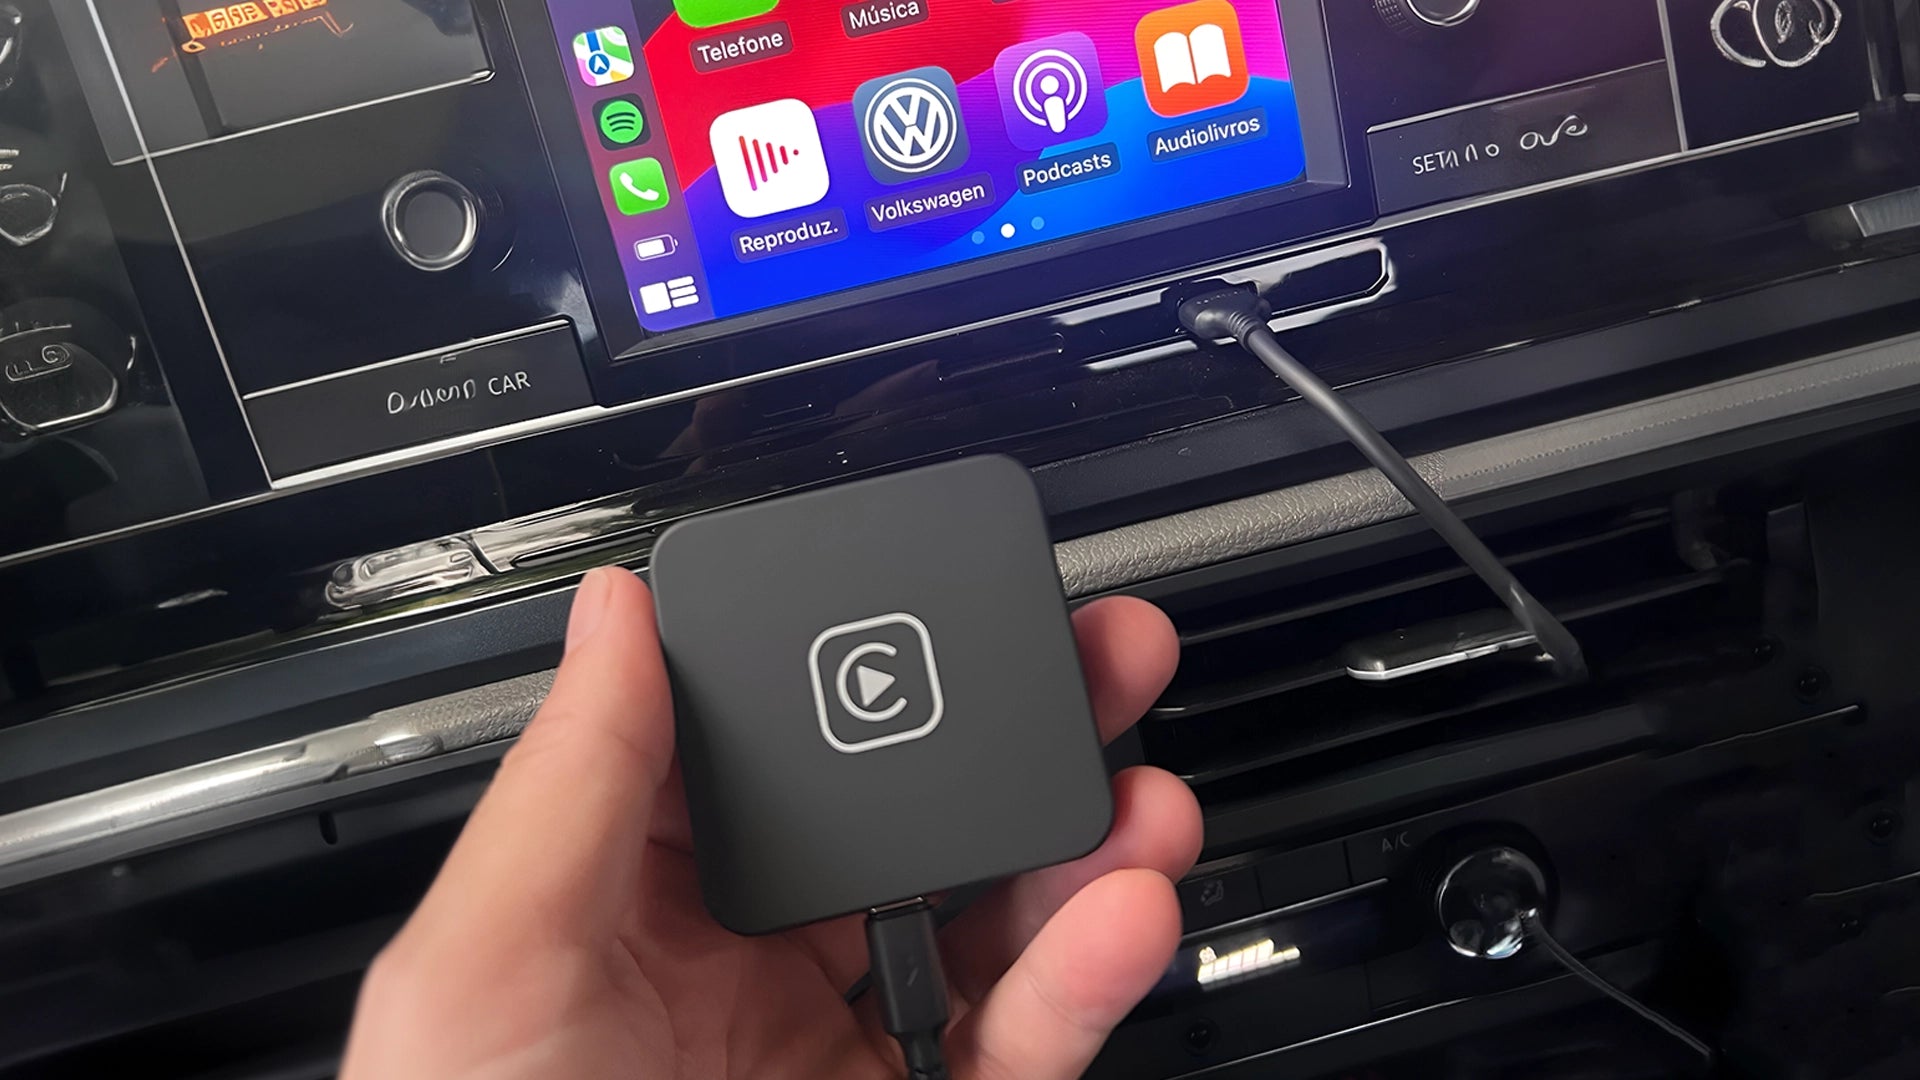 Hand holding a CarPlay adapter in front of a car's multimedia system with the CarPlay interface visible on the screen, indicating the adapter's compatibility and use.